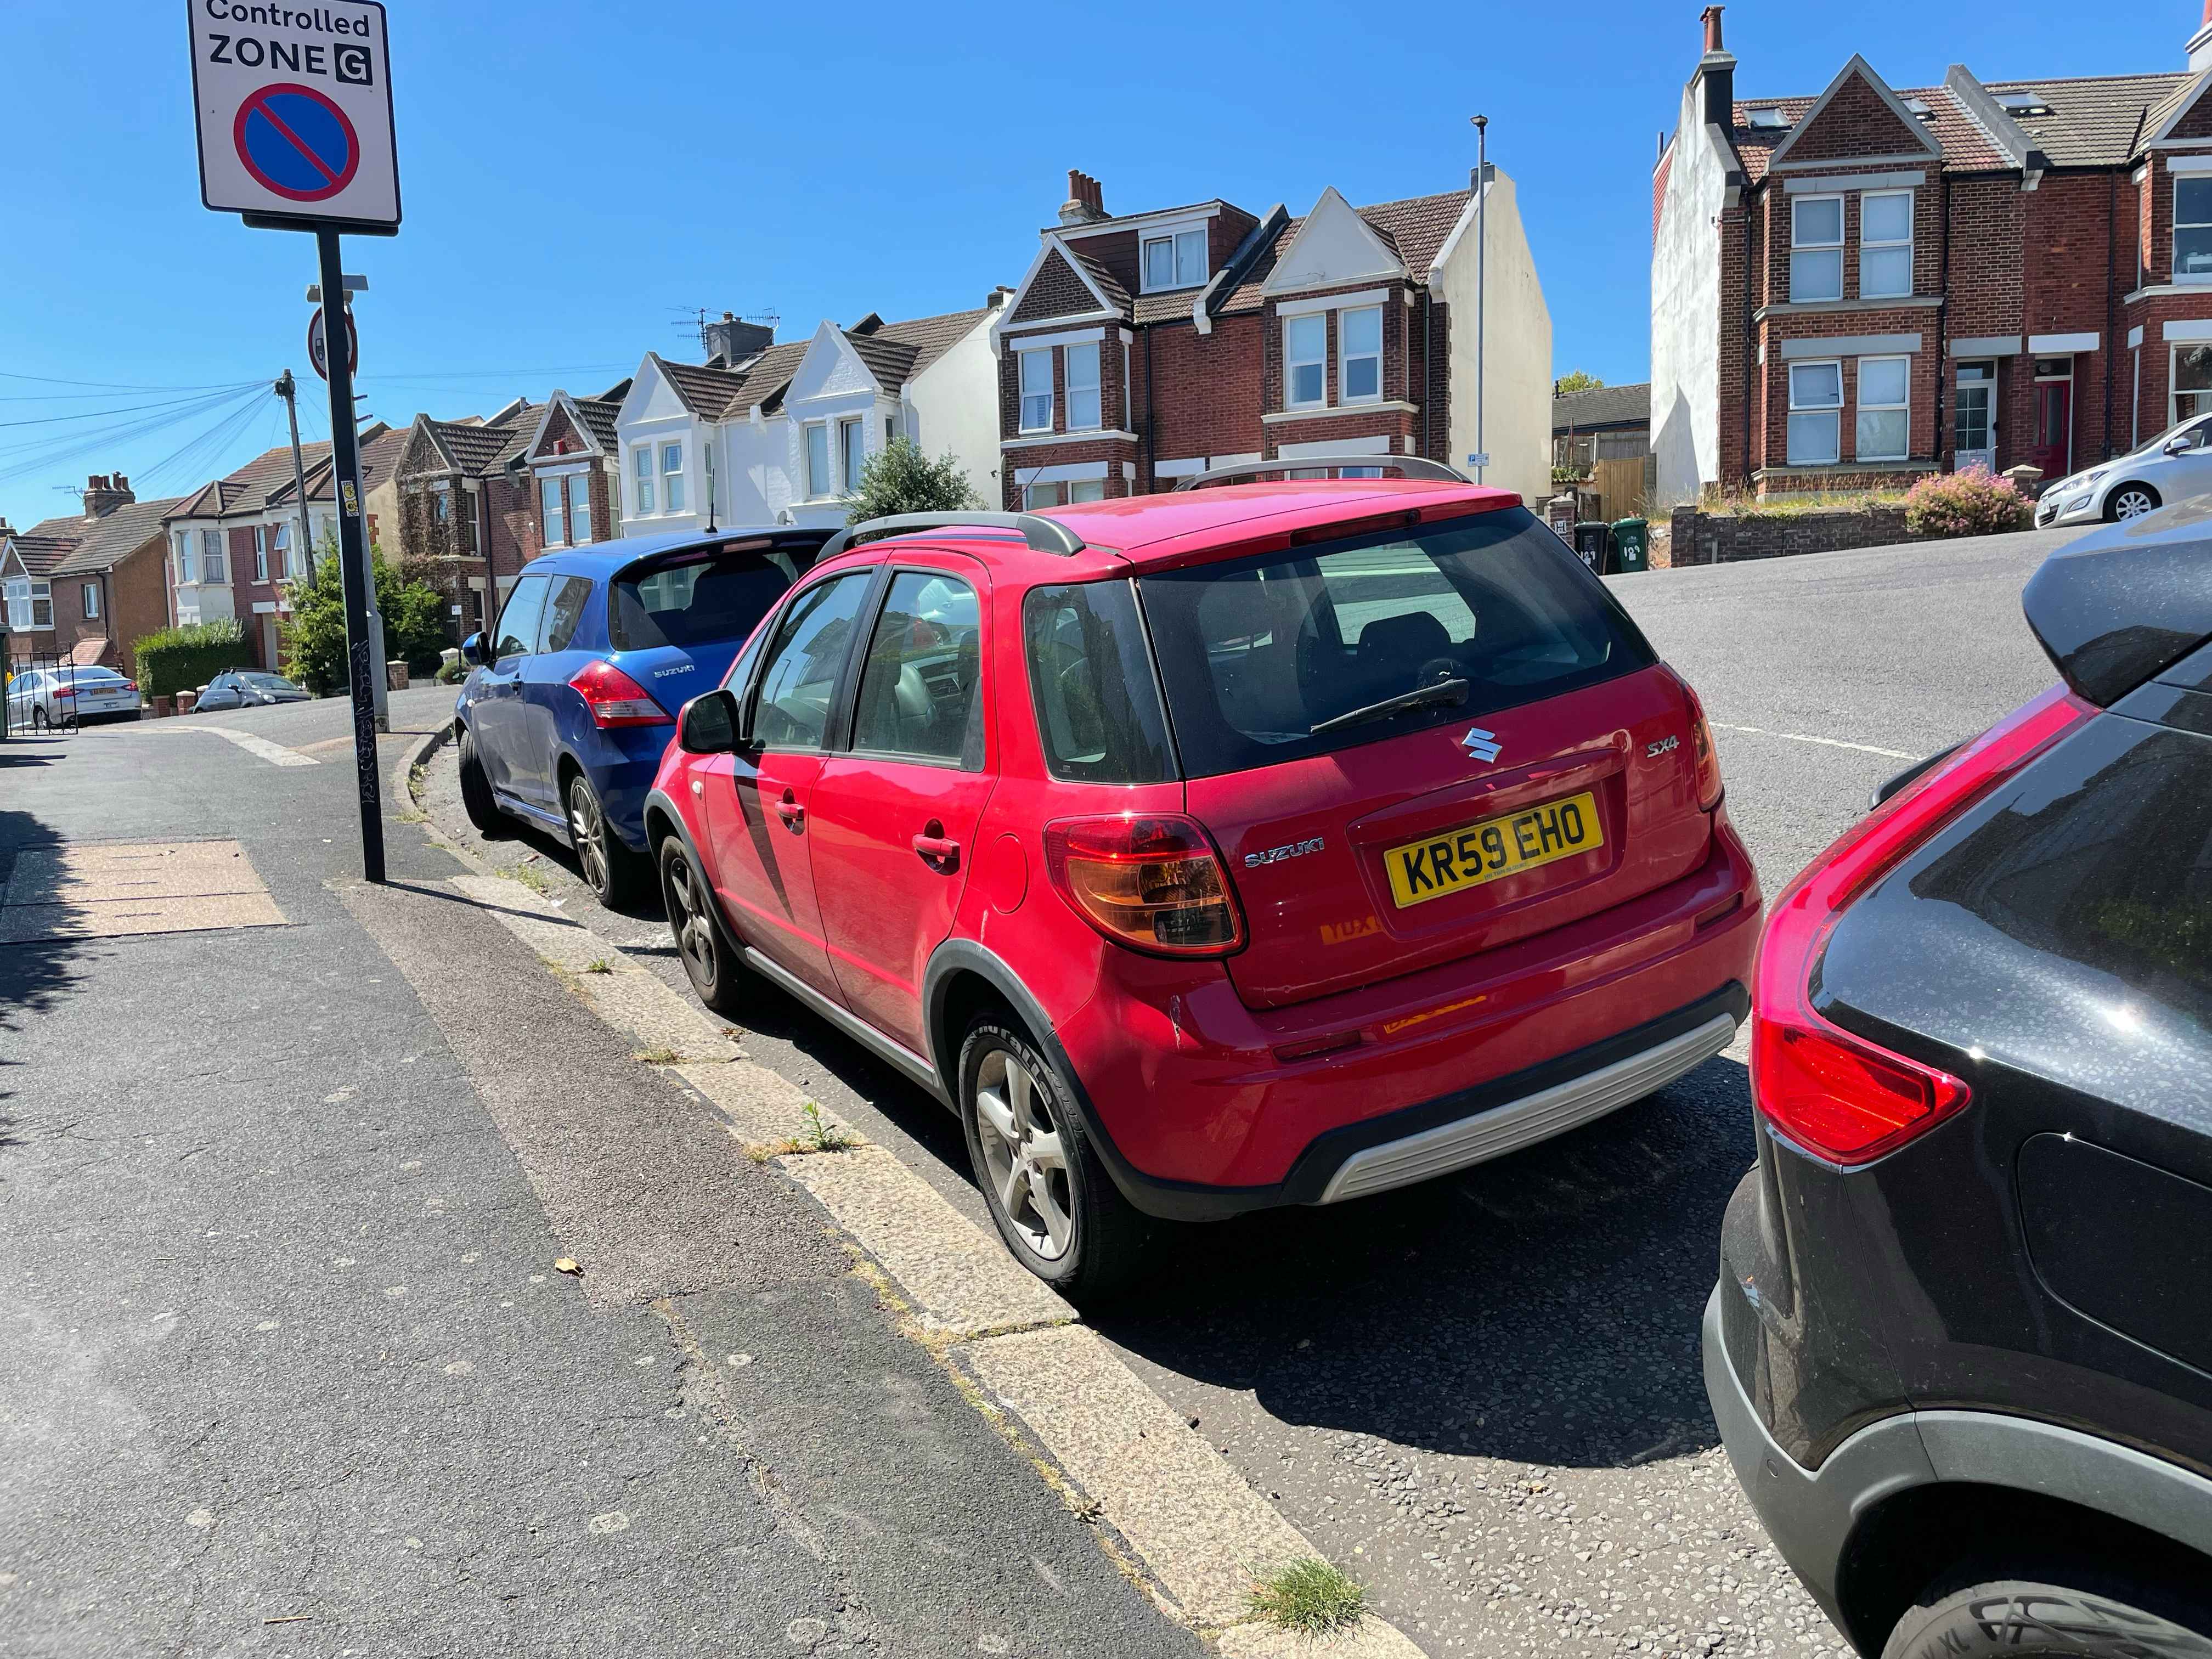 Photograph of KR59 EHO - a Red Suzuki SX4 parked in Hollingdean by a non-resident who uses the local area as part of their Brighton commute. The third of four photographs supplied by the residents of Hollingdean.